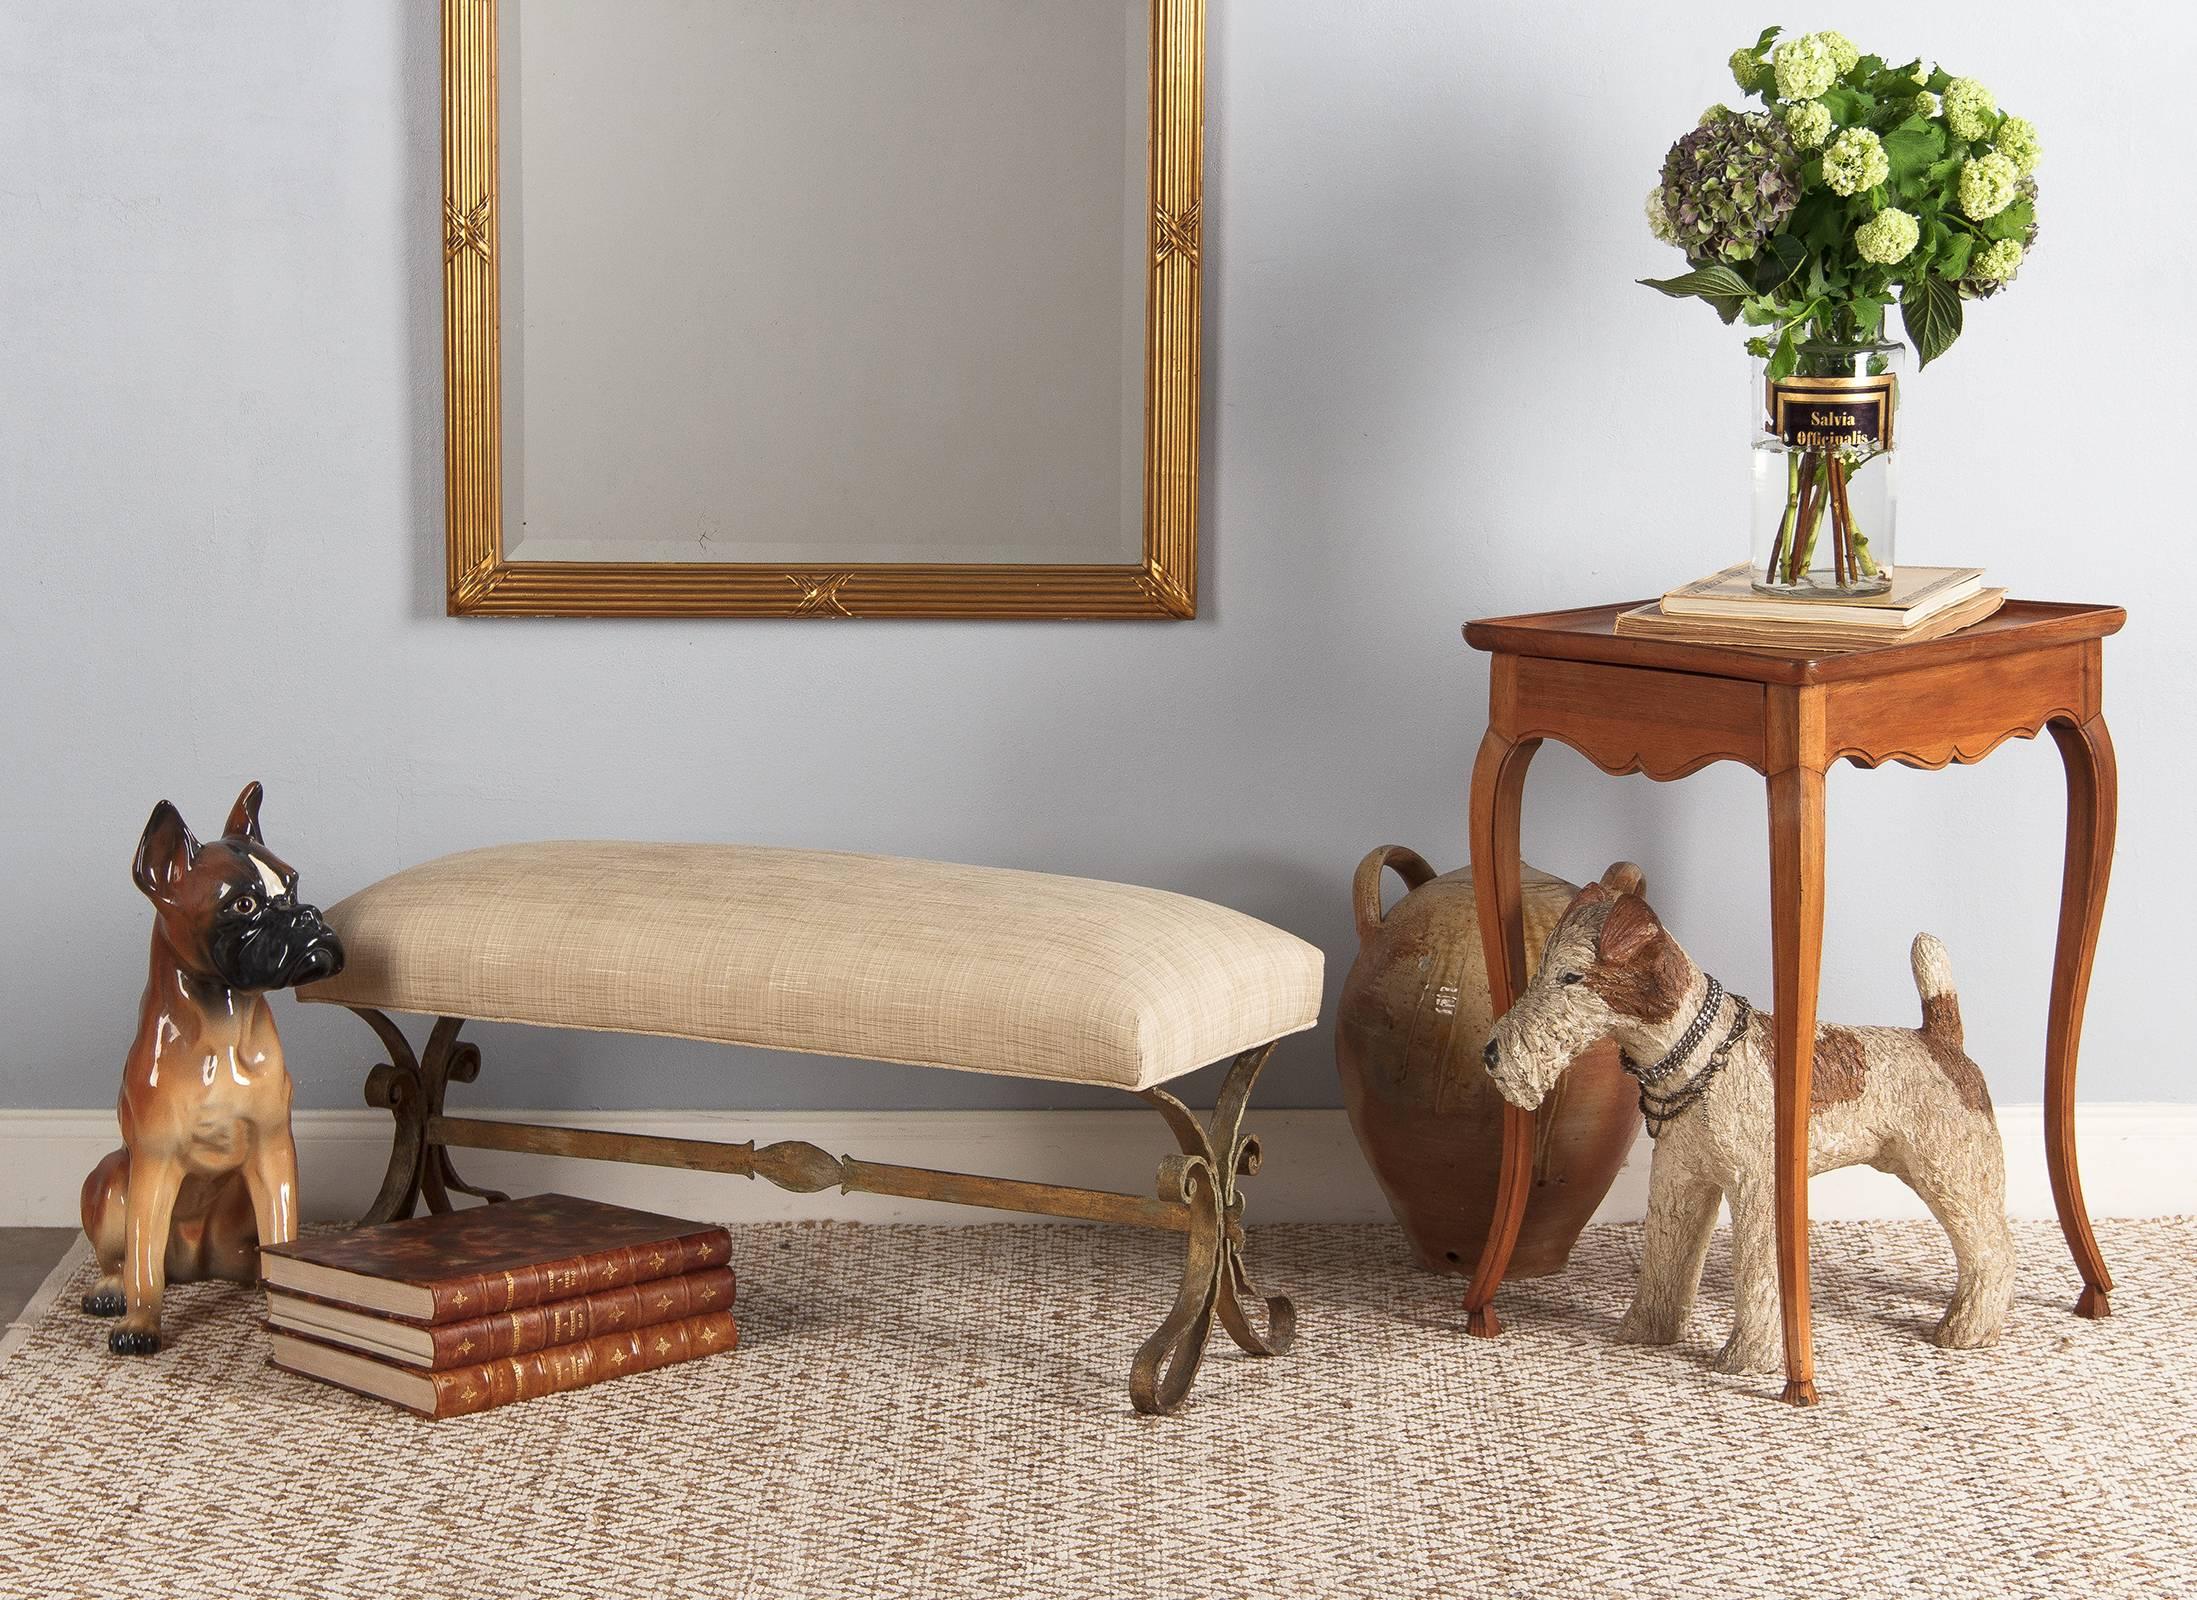 A gilt Iron bench with an antique finish from Barcelona, Spain, circa 1950s. The base has scrolled designs and a stretcher. The upholstery is new.